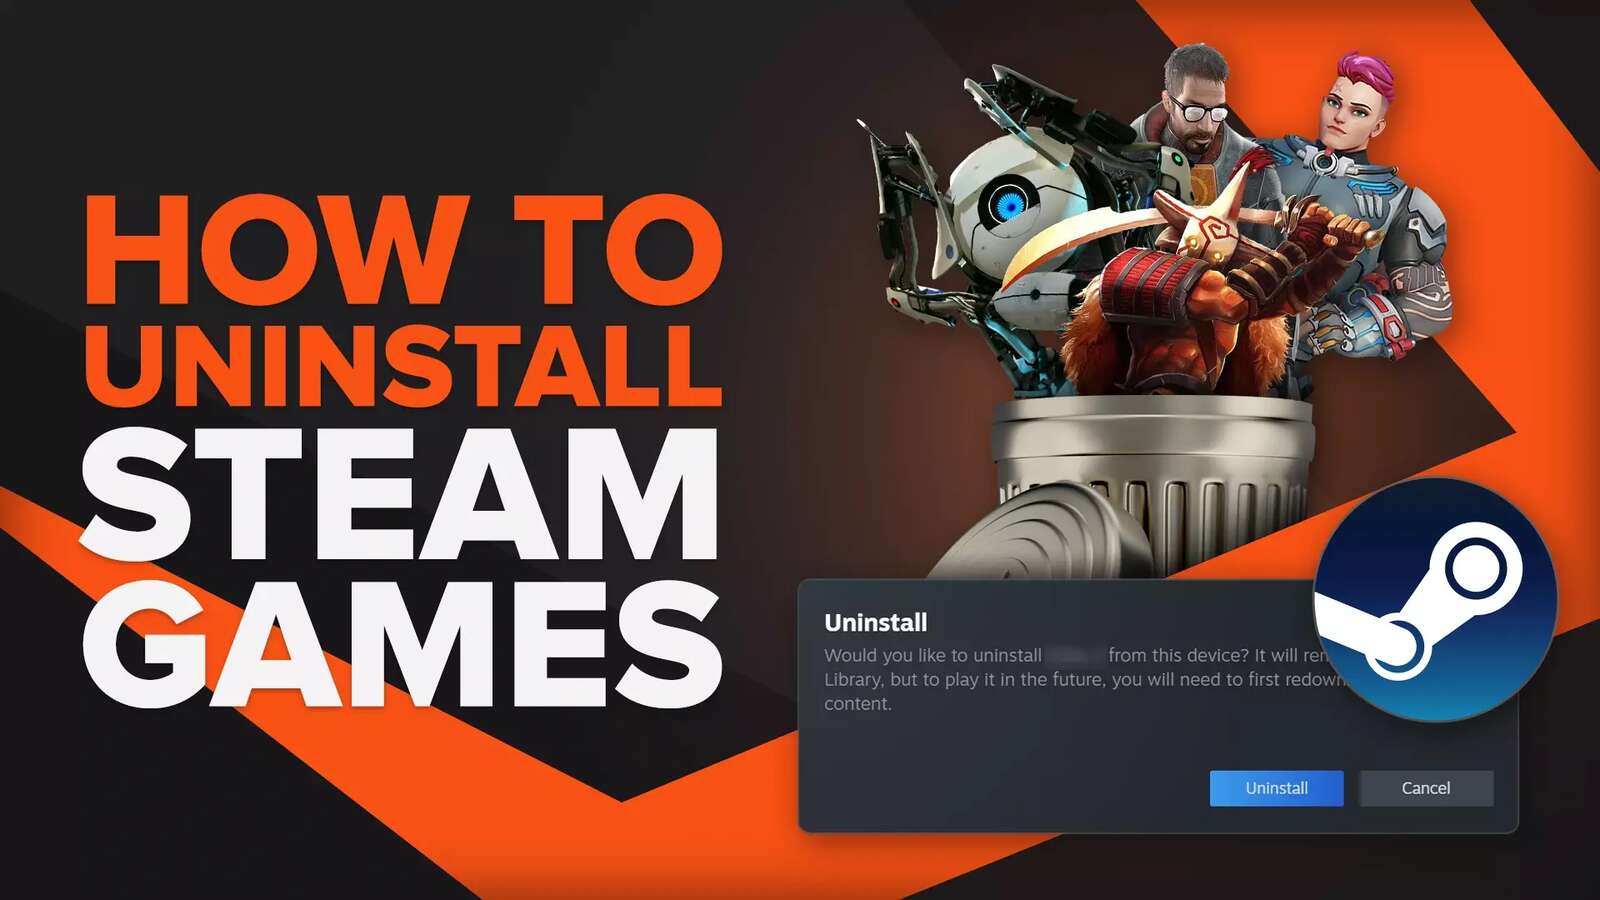 Here's How to Uninstall Steam Games [Complete Guide]